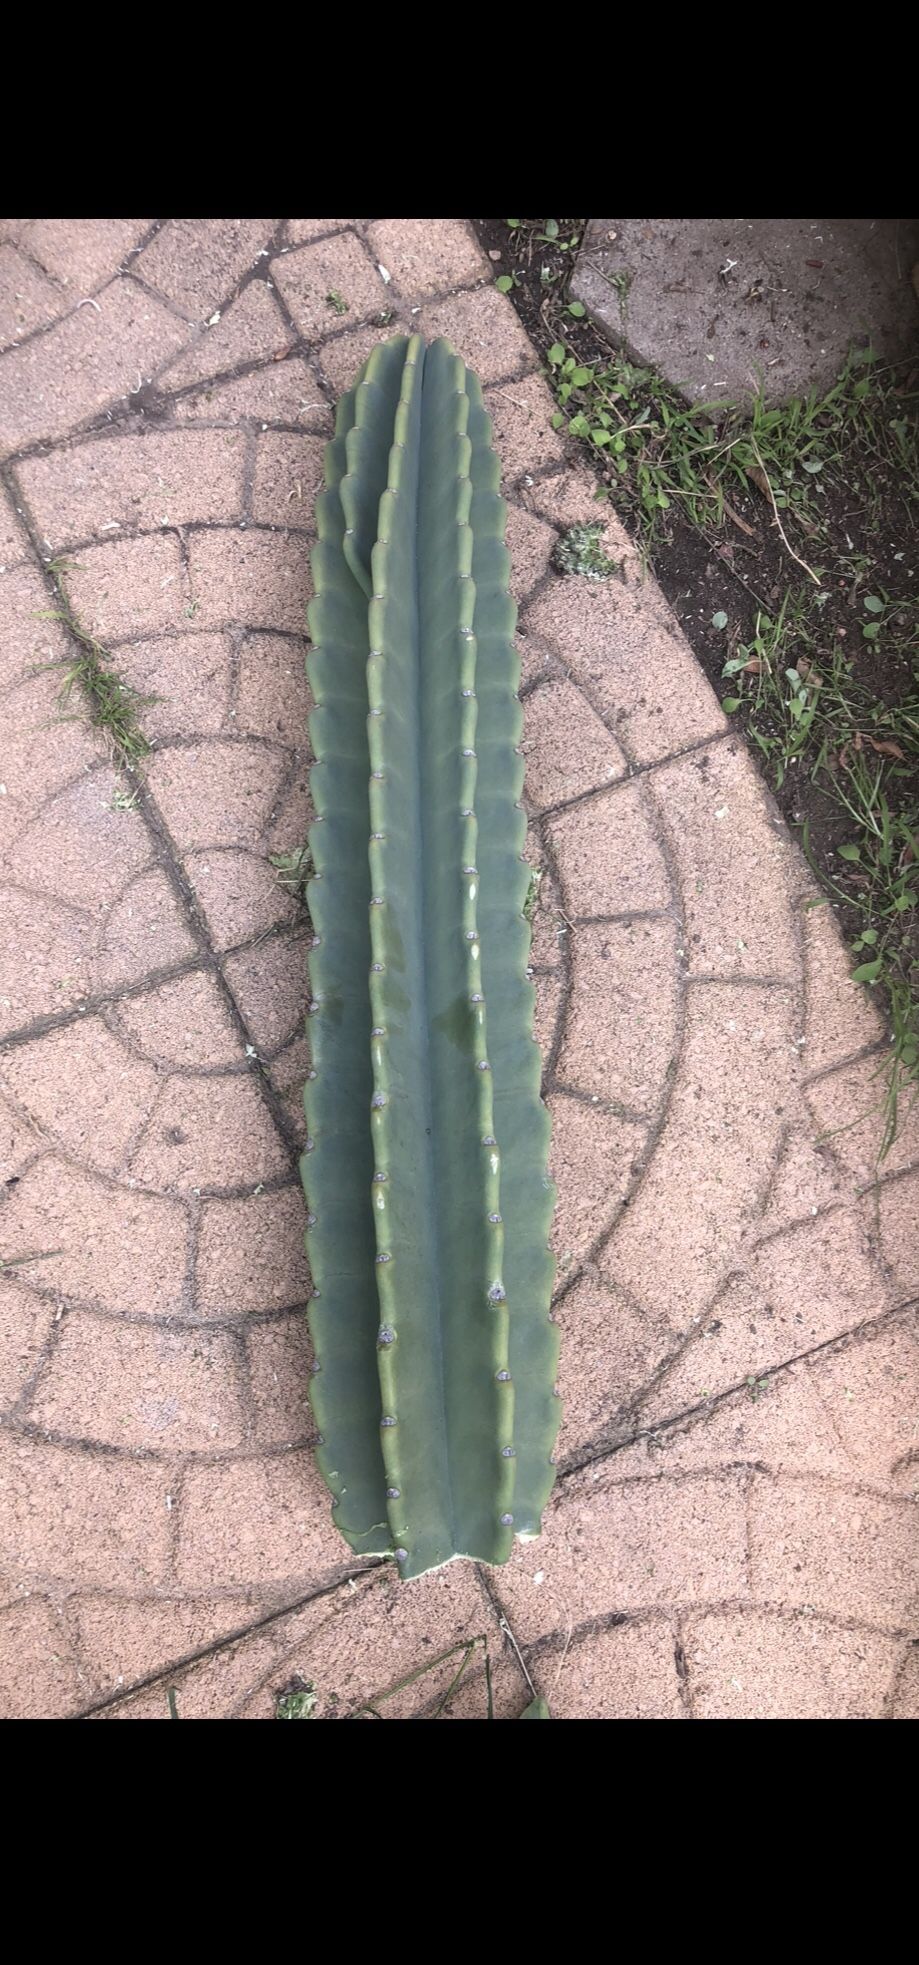 Cactus Live Clipping Ready To Pop Or Plant 31”